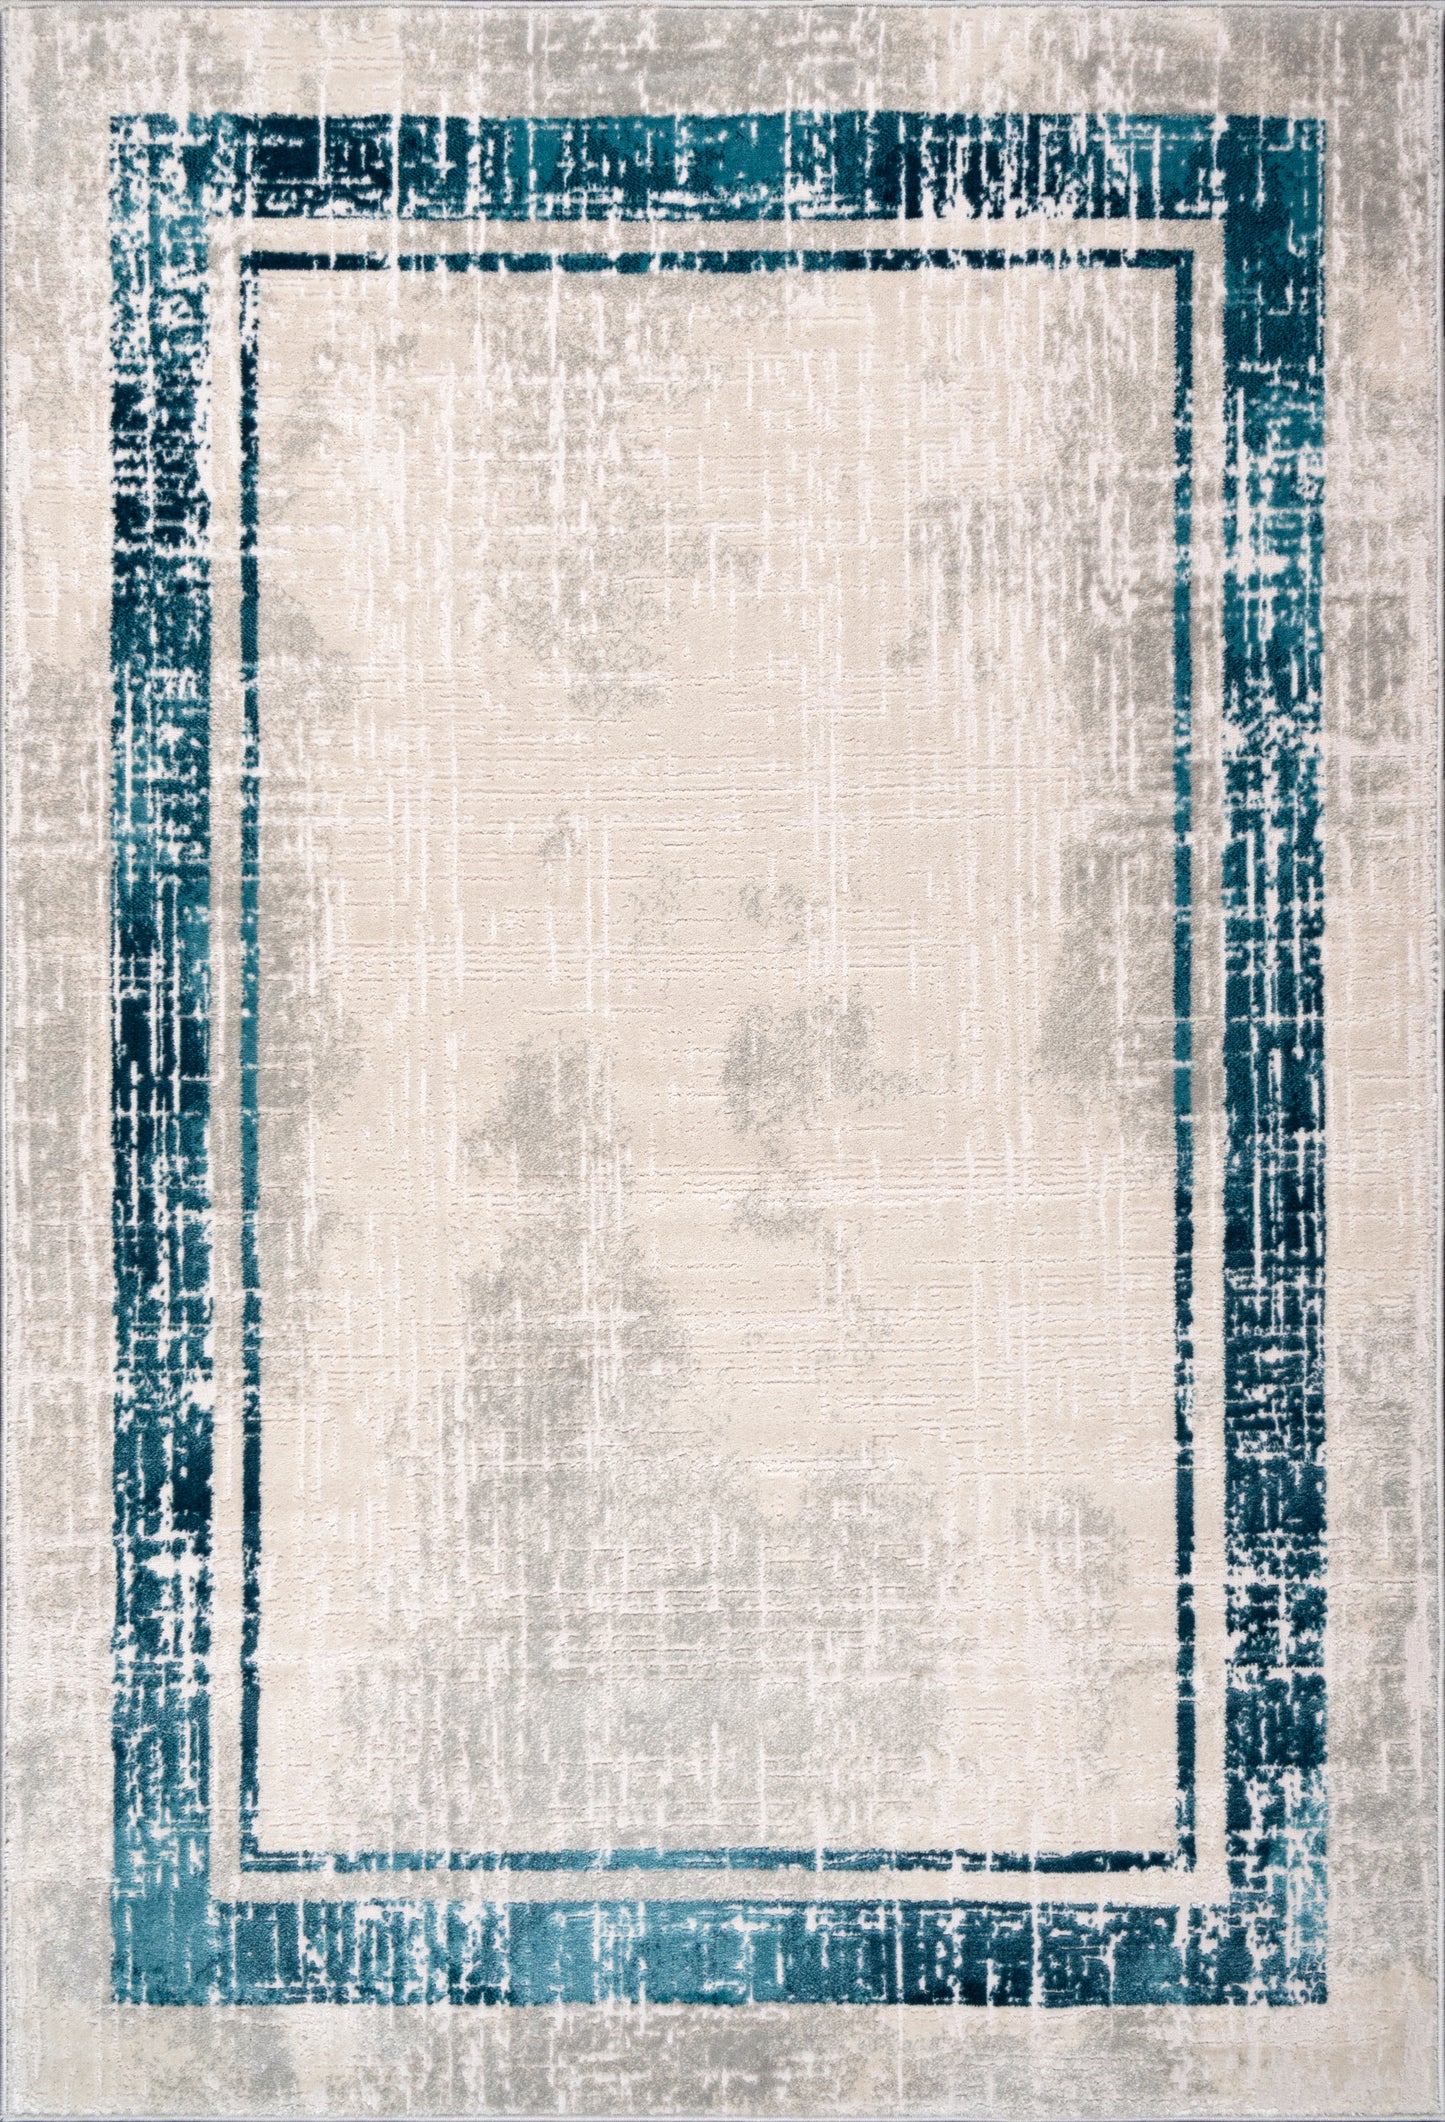 Blue Grey Bordered Modern Contemporary Minimalistic Area Rug For Living Room Bedroom